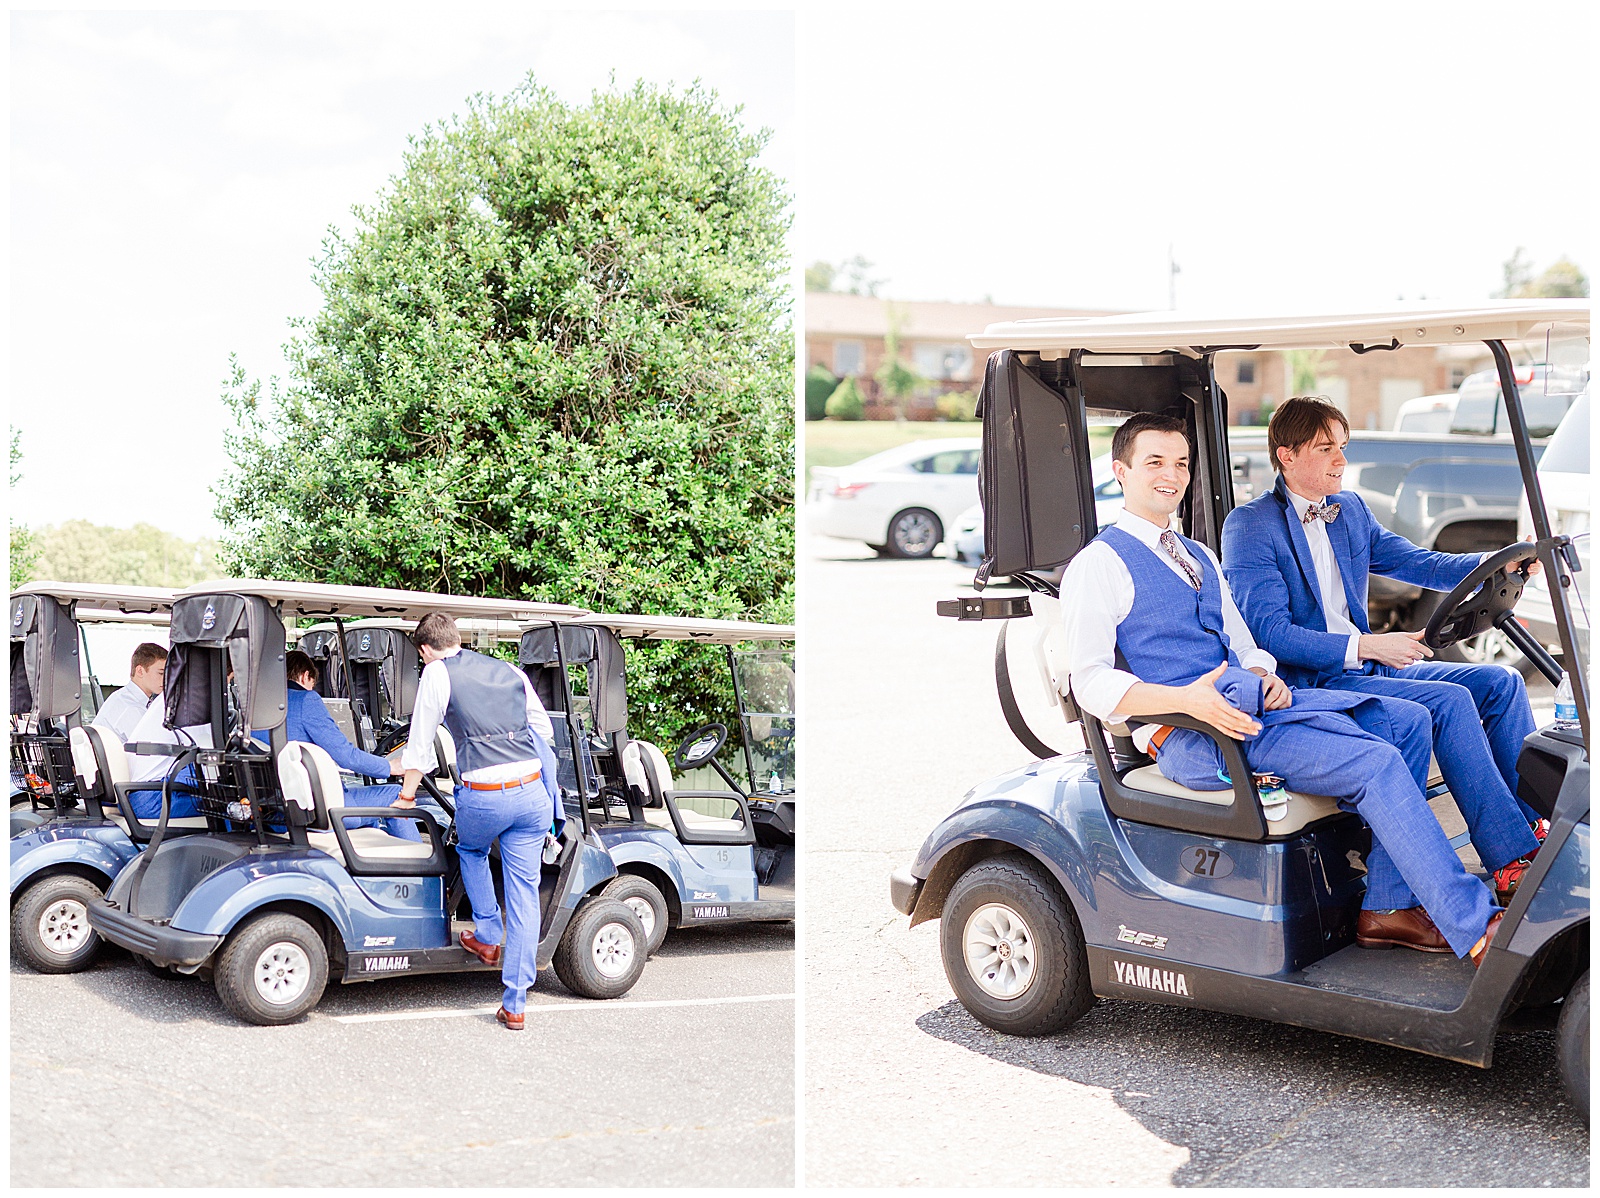 Blue Themed Groomsmen ride golf carts at Outdoorsy Summer Wedding at North Carolina Lakehouse in the Mountains | check out the full wedding at KevynDixonPhoto.com